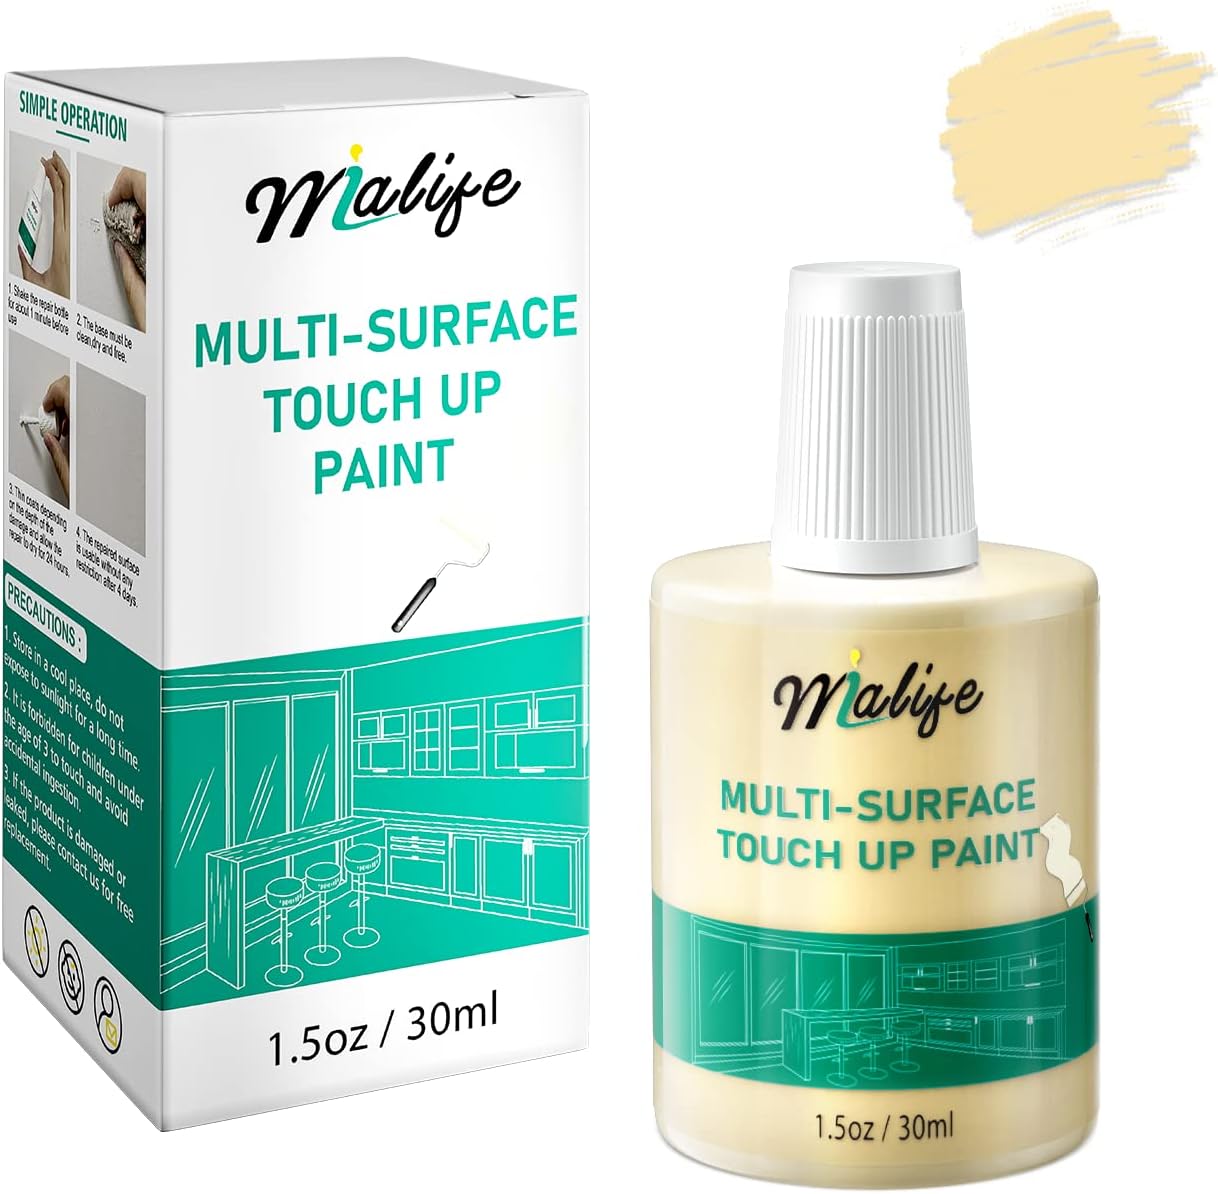 Multi-Surface Touch Up Paint, Waterproof and Quick [...]